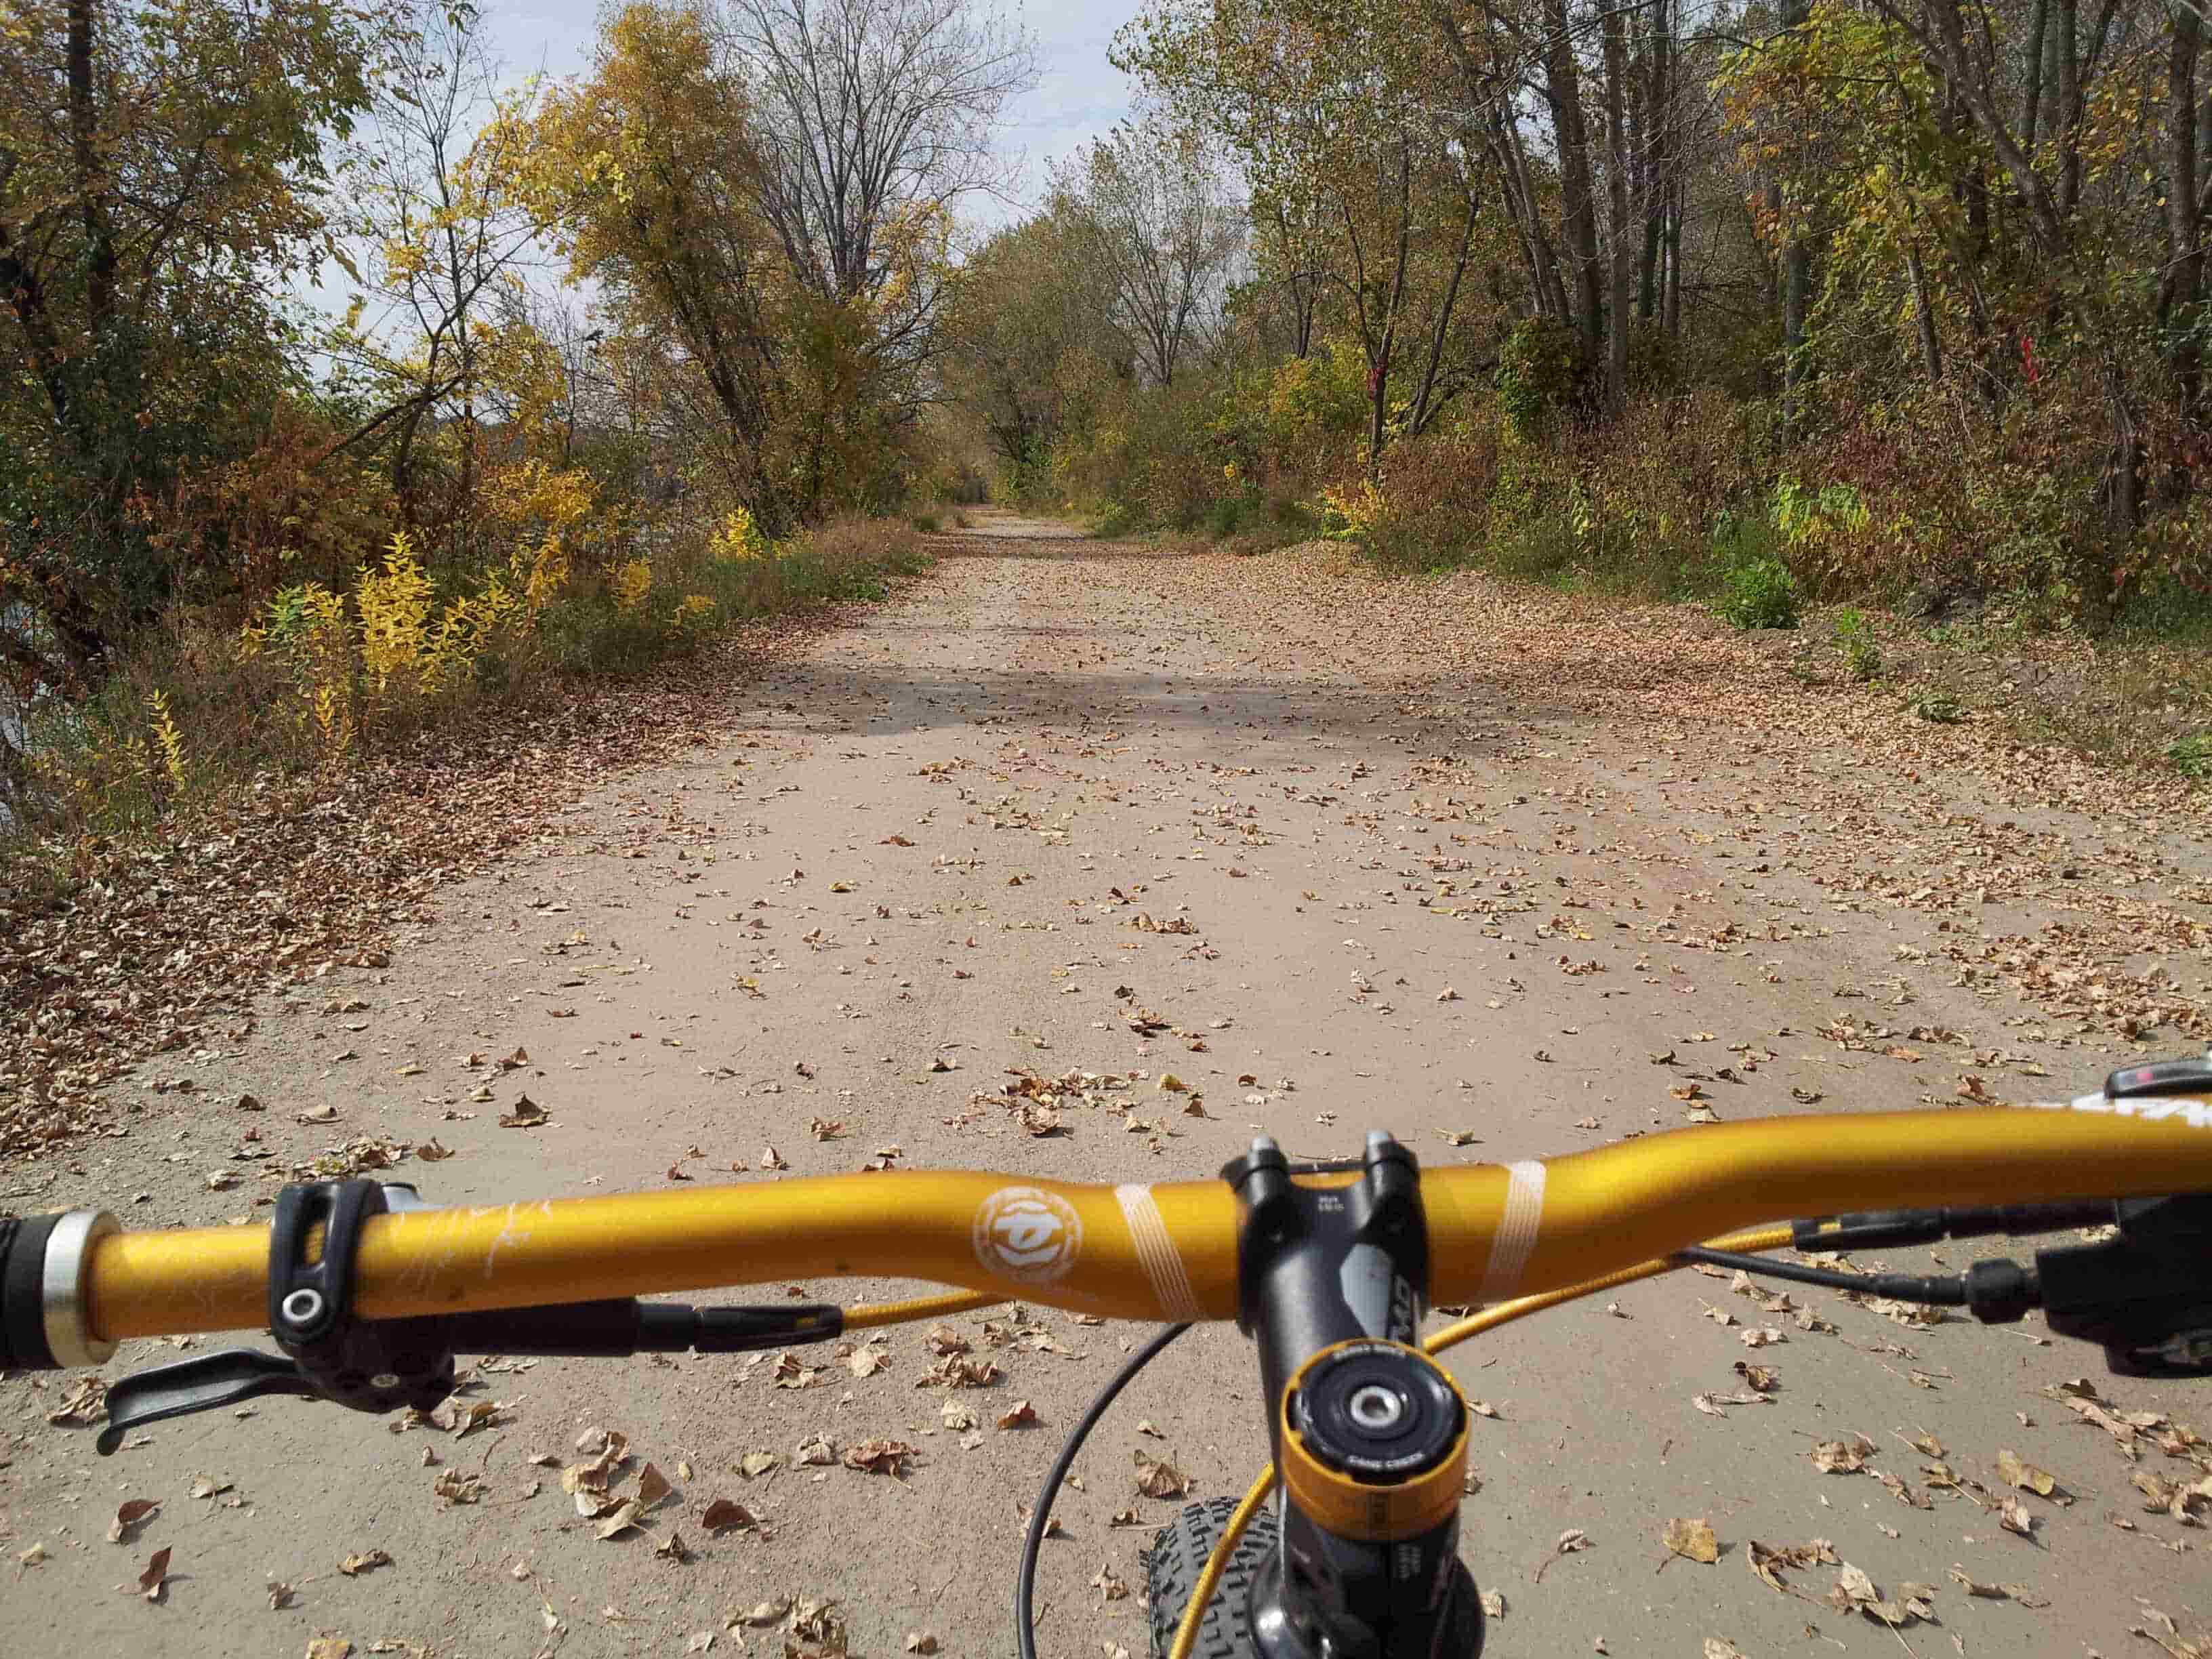 Handlebars of a Surly Krampus bike, facing straight down a gravel road, with changing trees on both sides